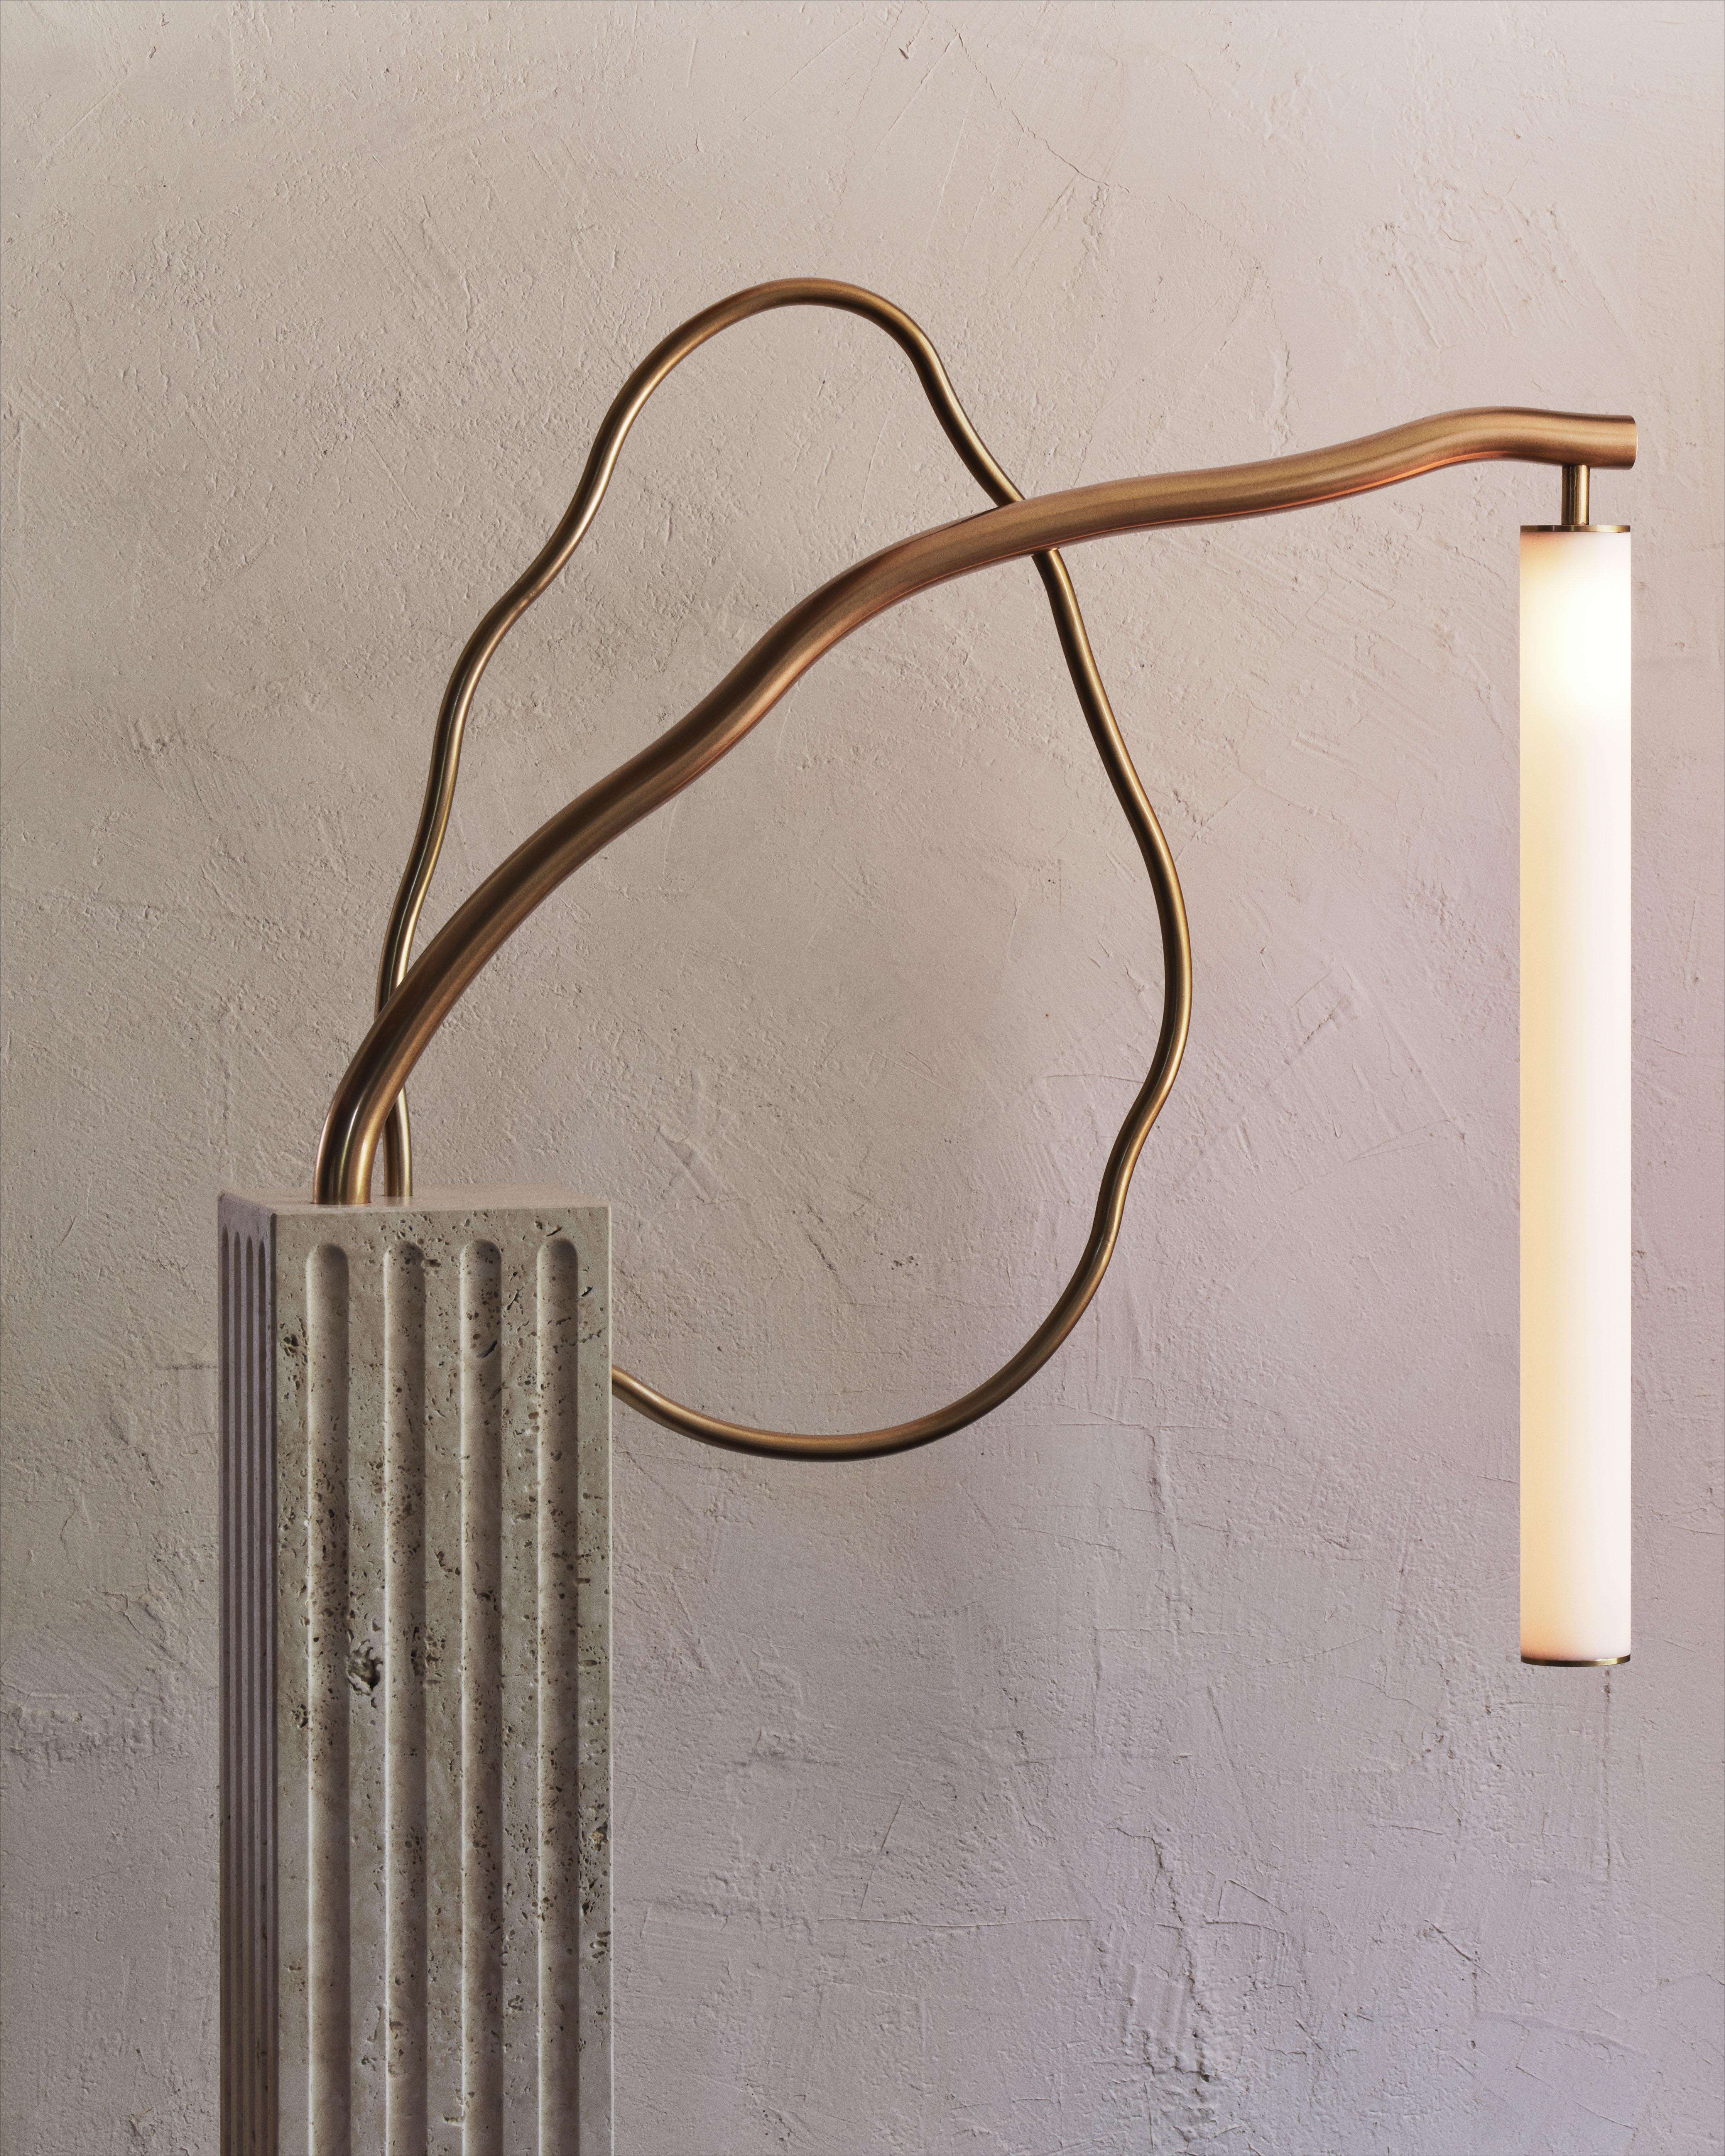 Organic tubes of bronze emerge from a rectangular fluted travertine plinth. An acrylic tube suspended in space provides a soft glow.

Materials: Light Travertine, Matte White Acrylic, Sulfur Bronzed Steel

Dimensions: 25-1/8